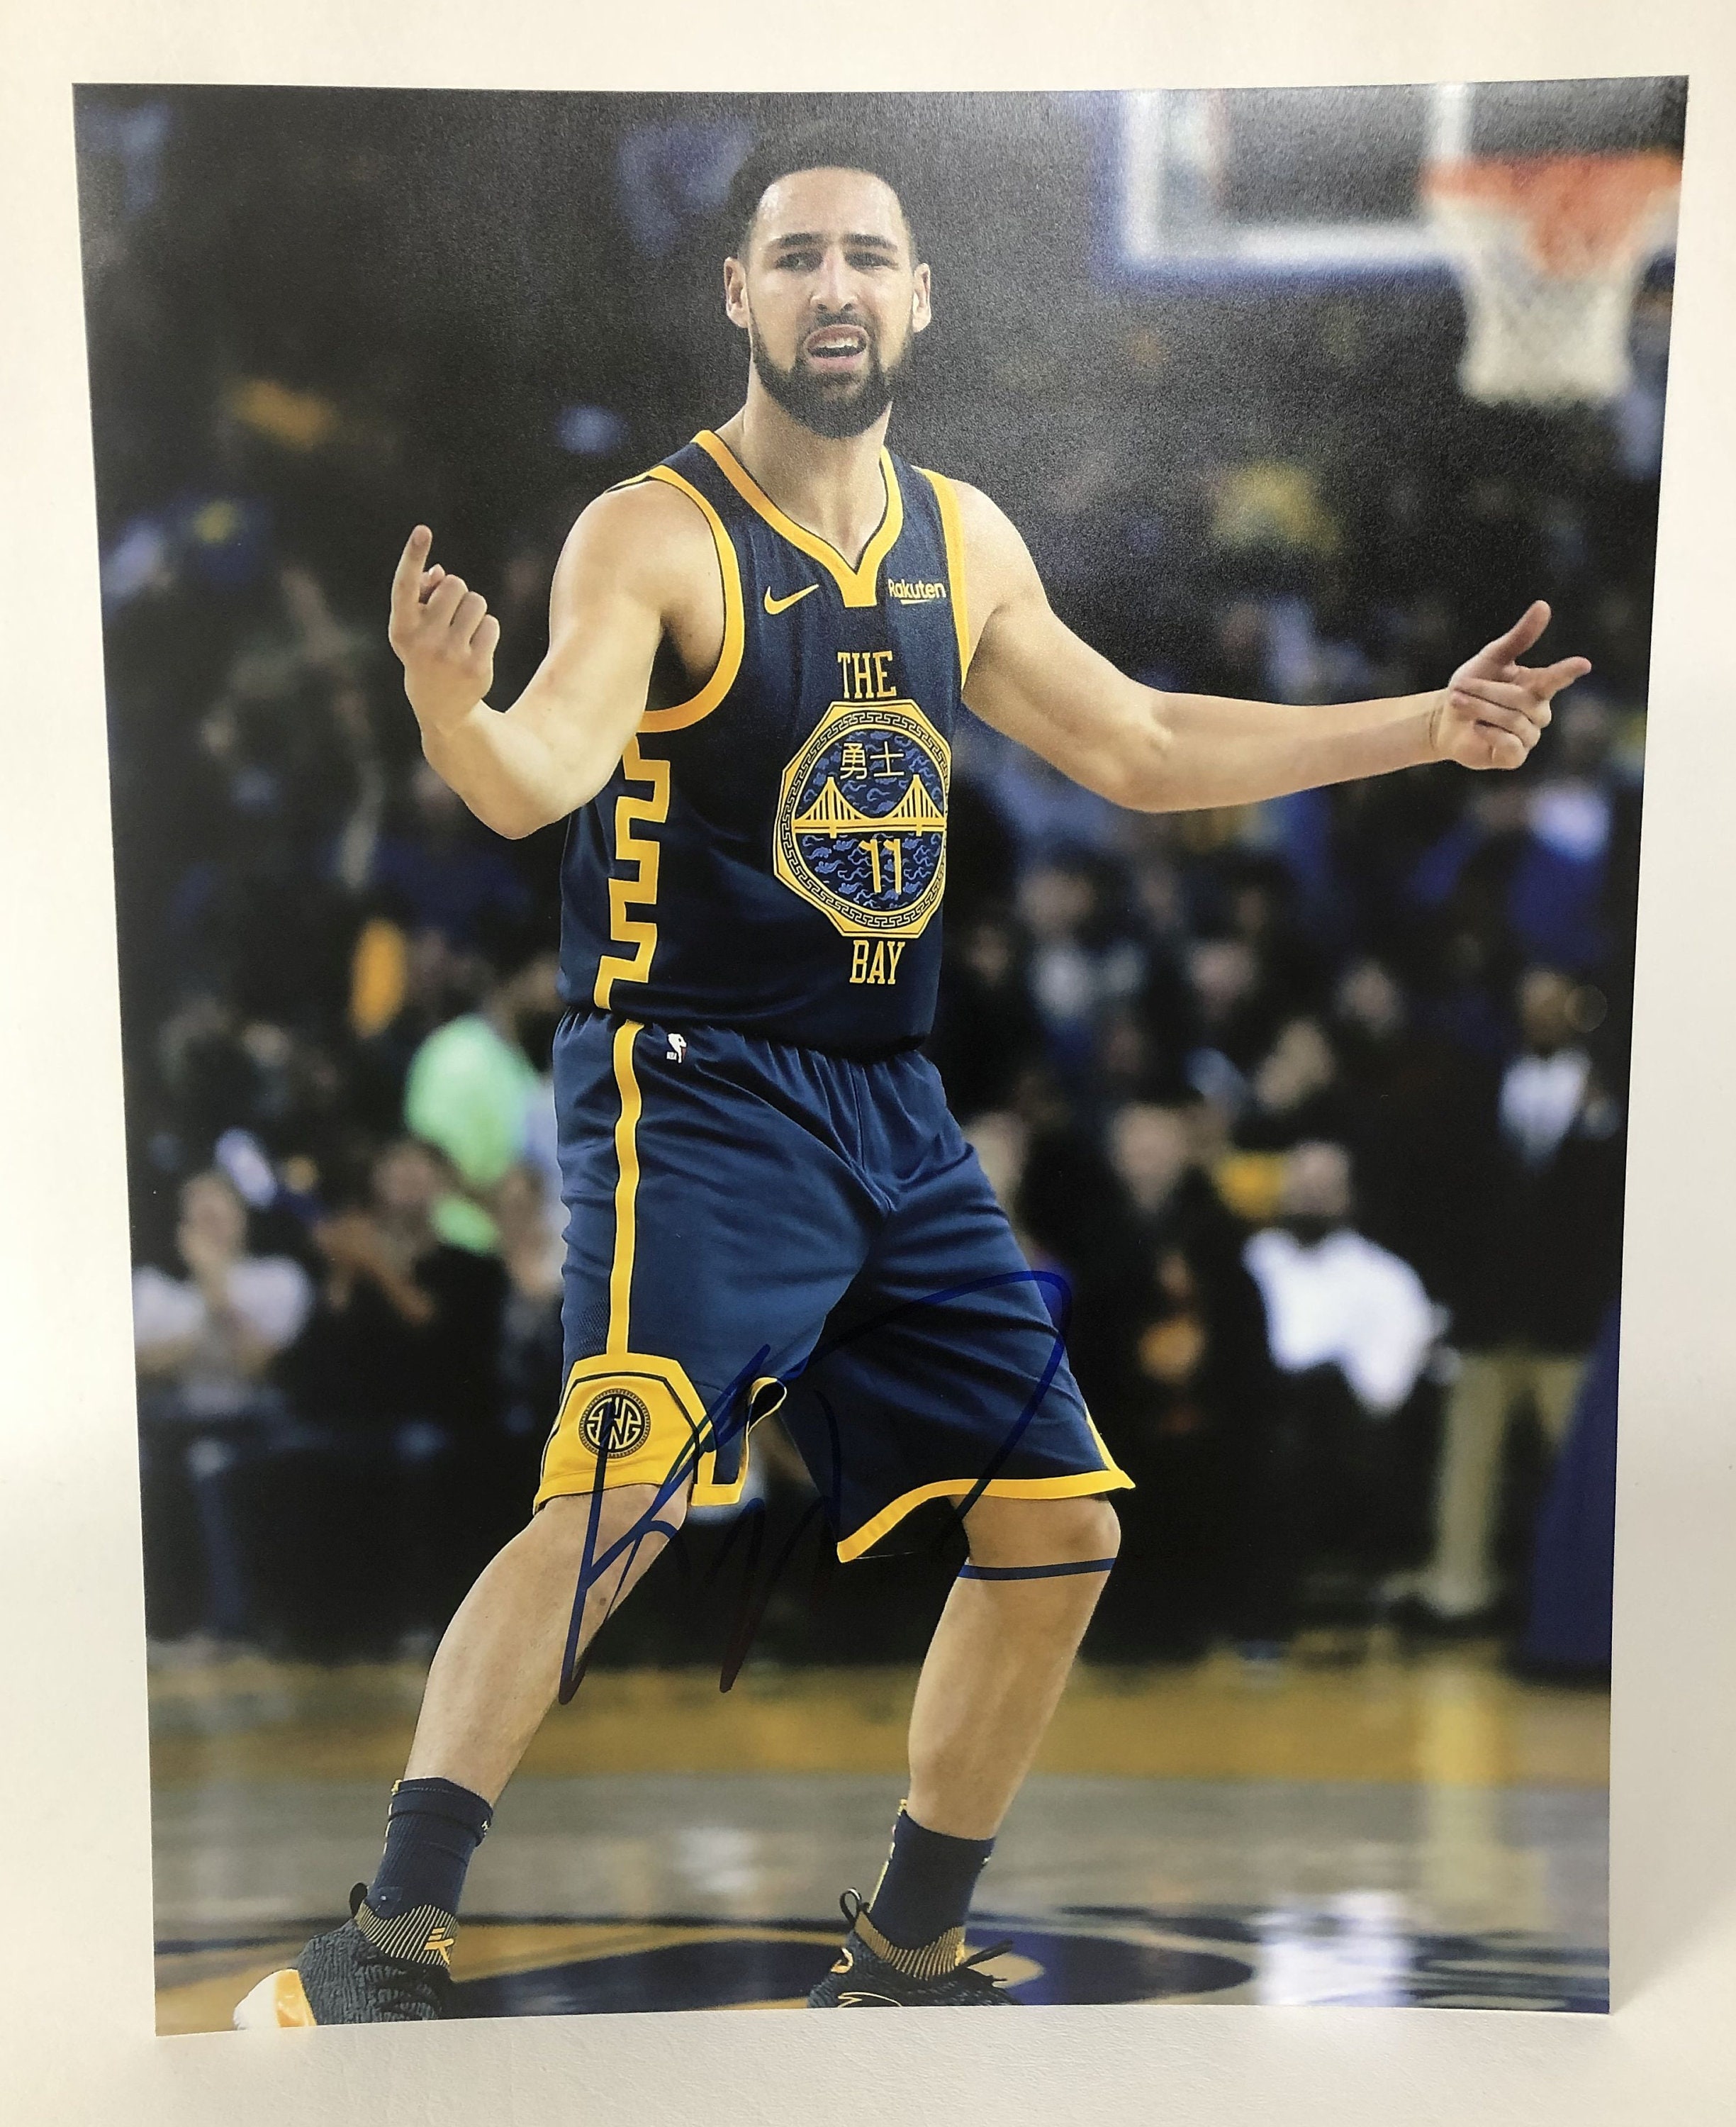 Klay Thompson White Golden State Warriors Autographed Association